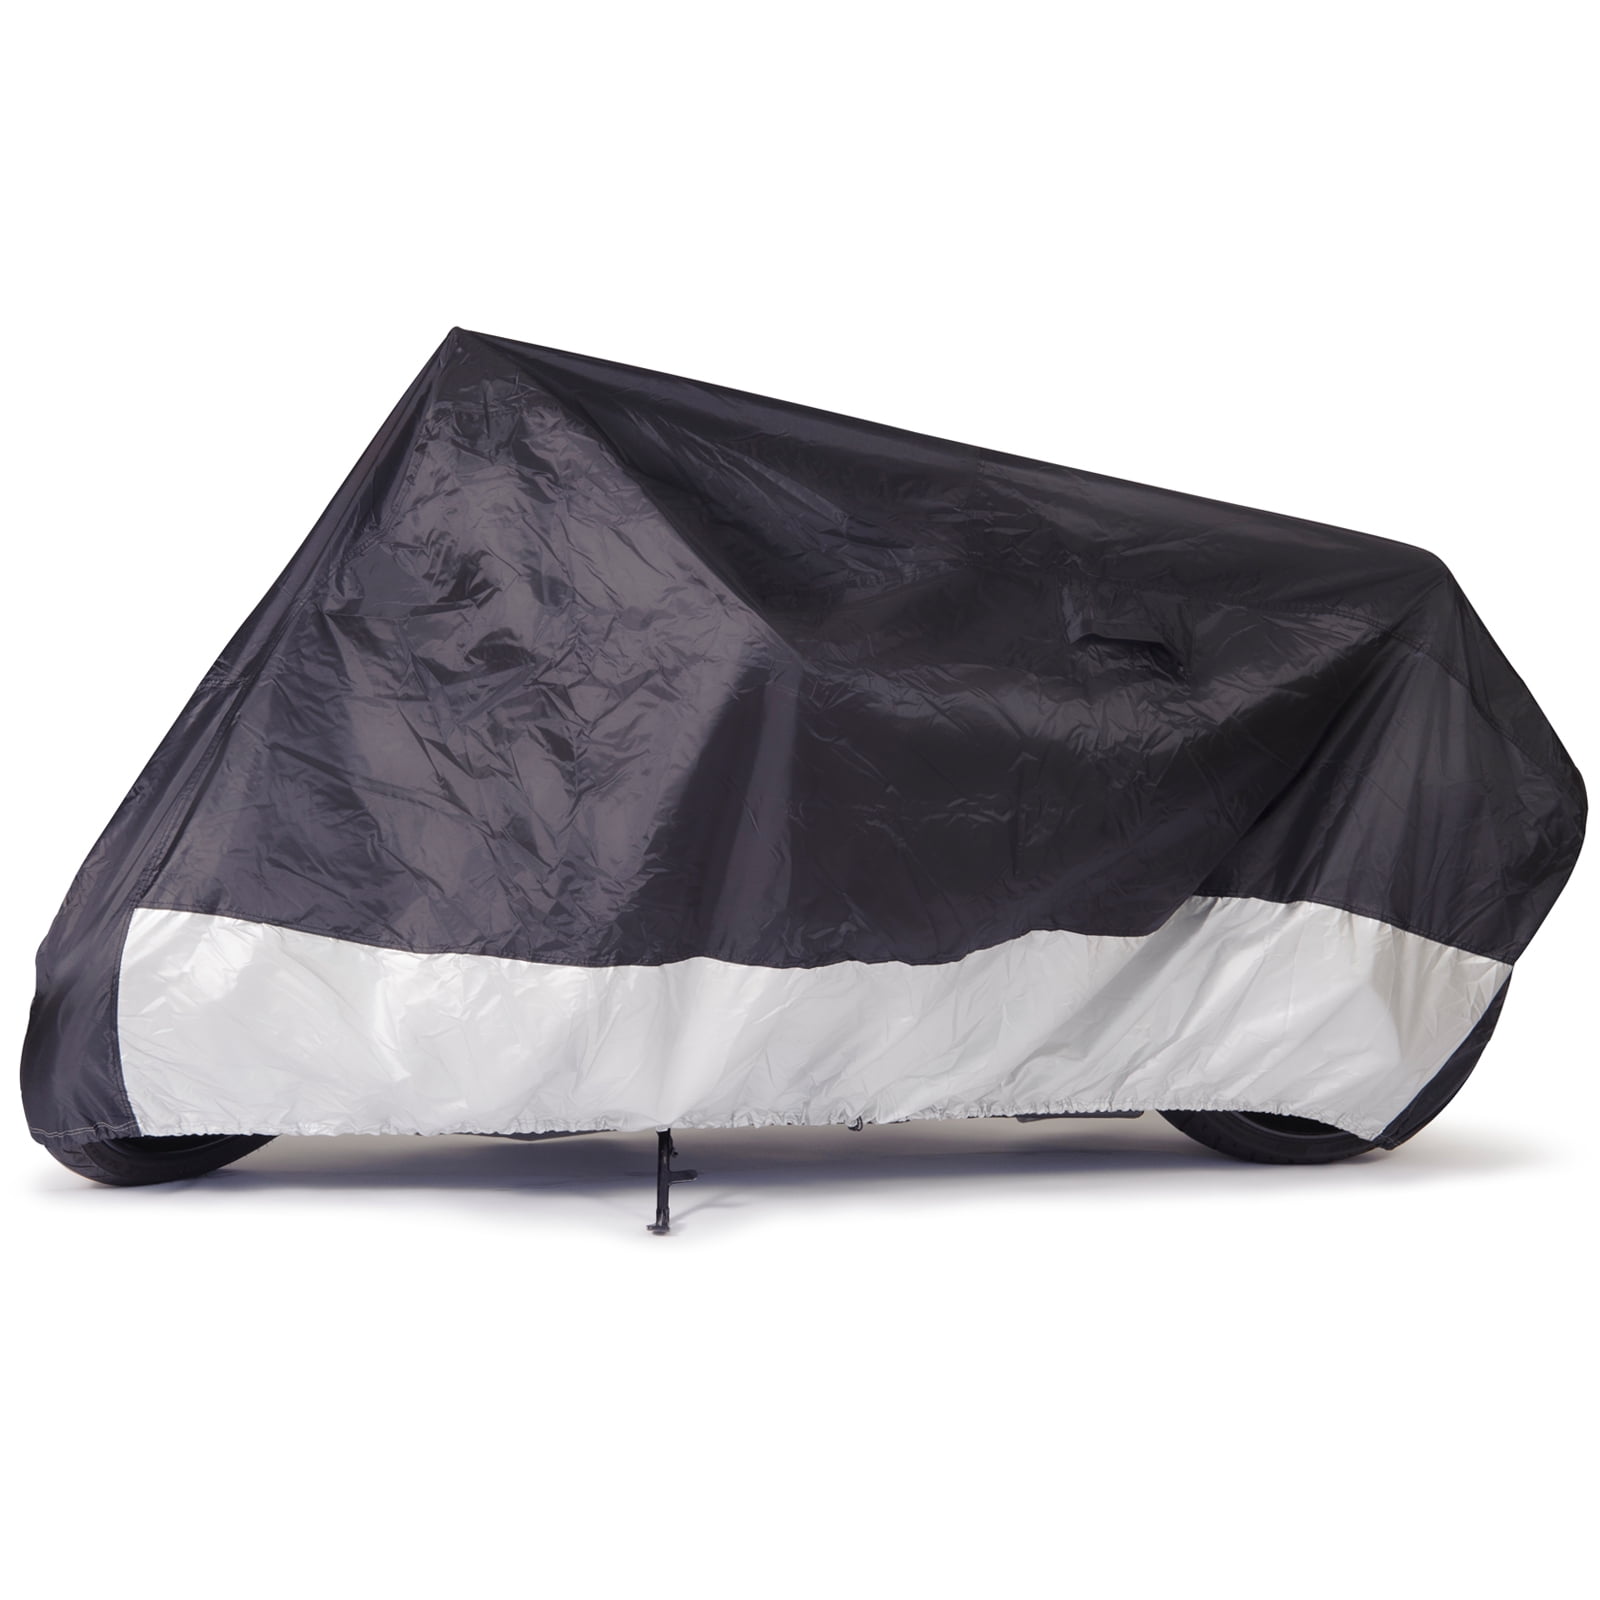 small motorcycle cover